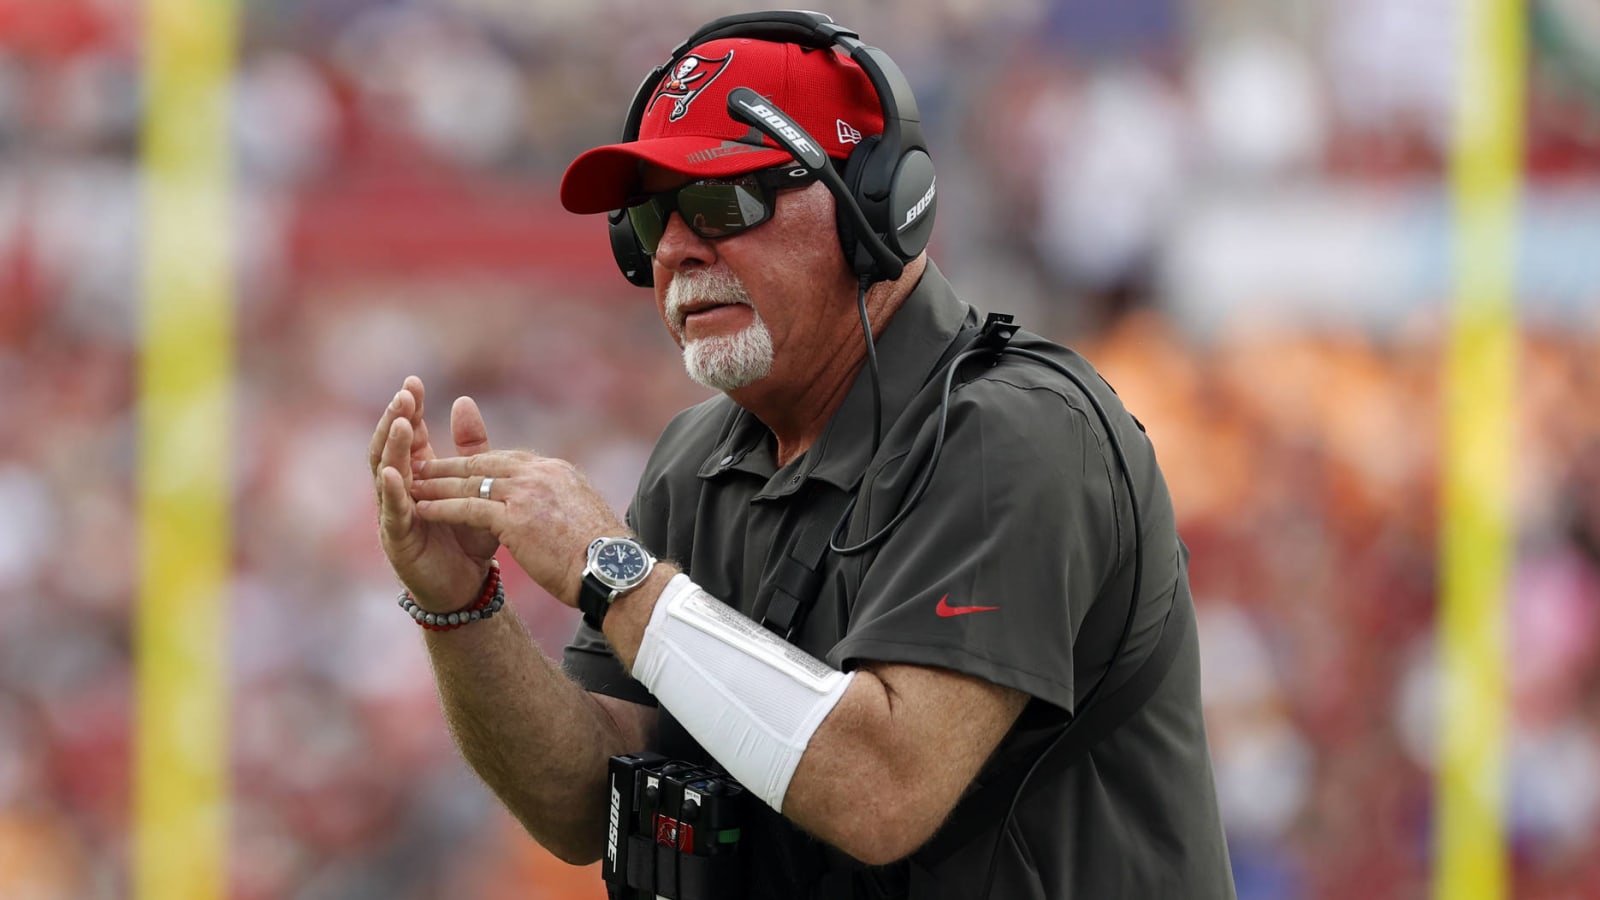 Arians does not seem happy with NFL’s taunting emphasis